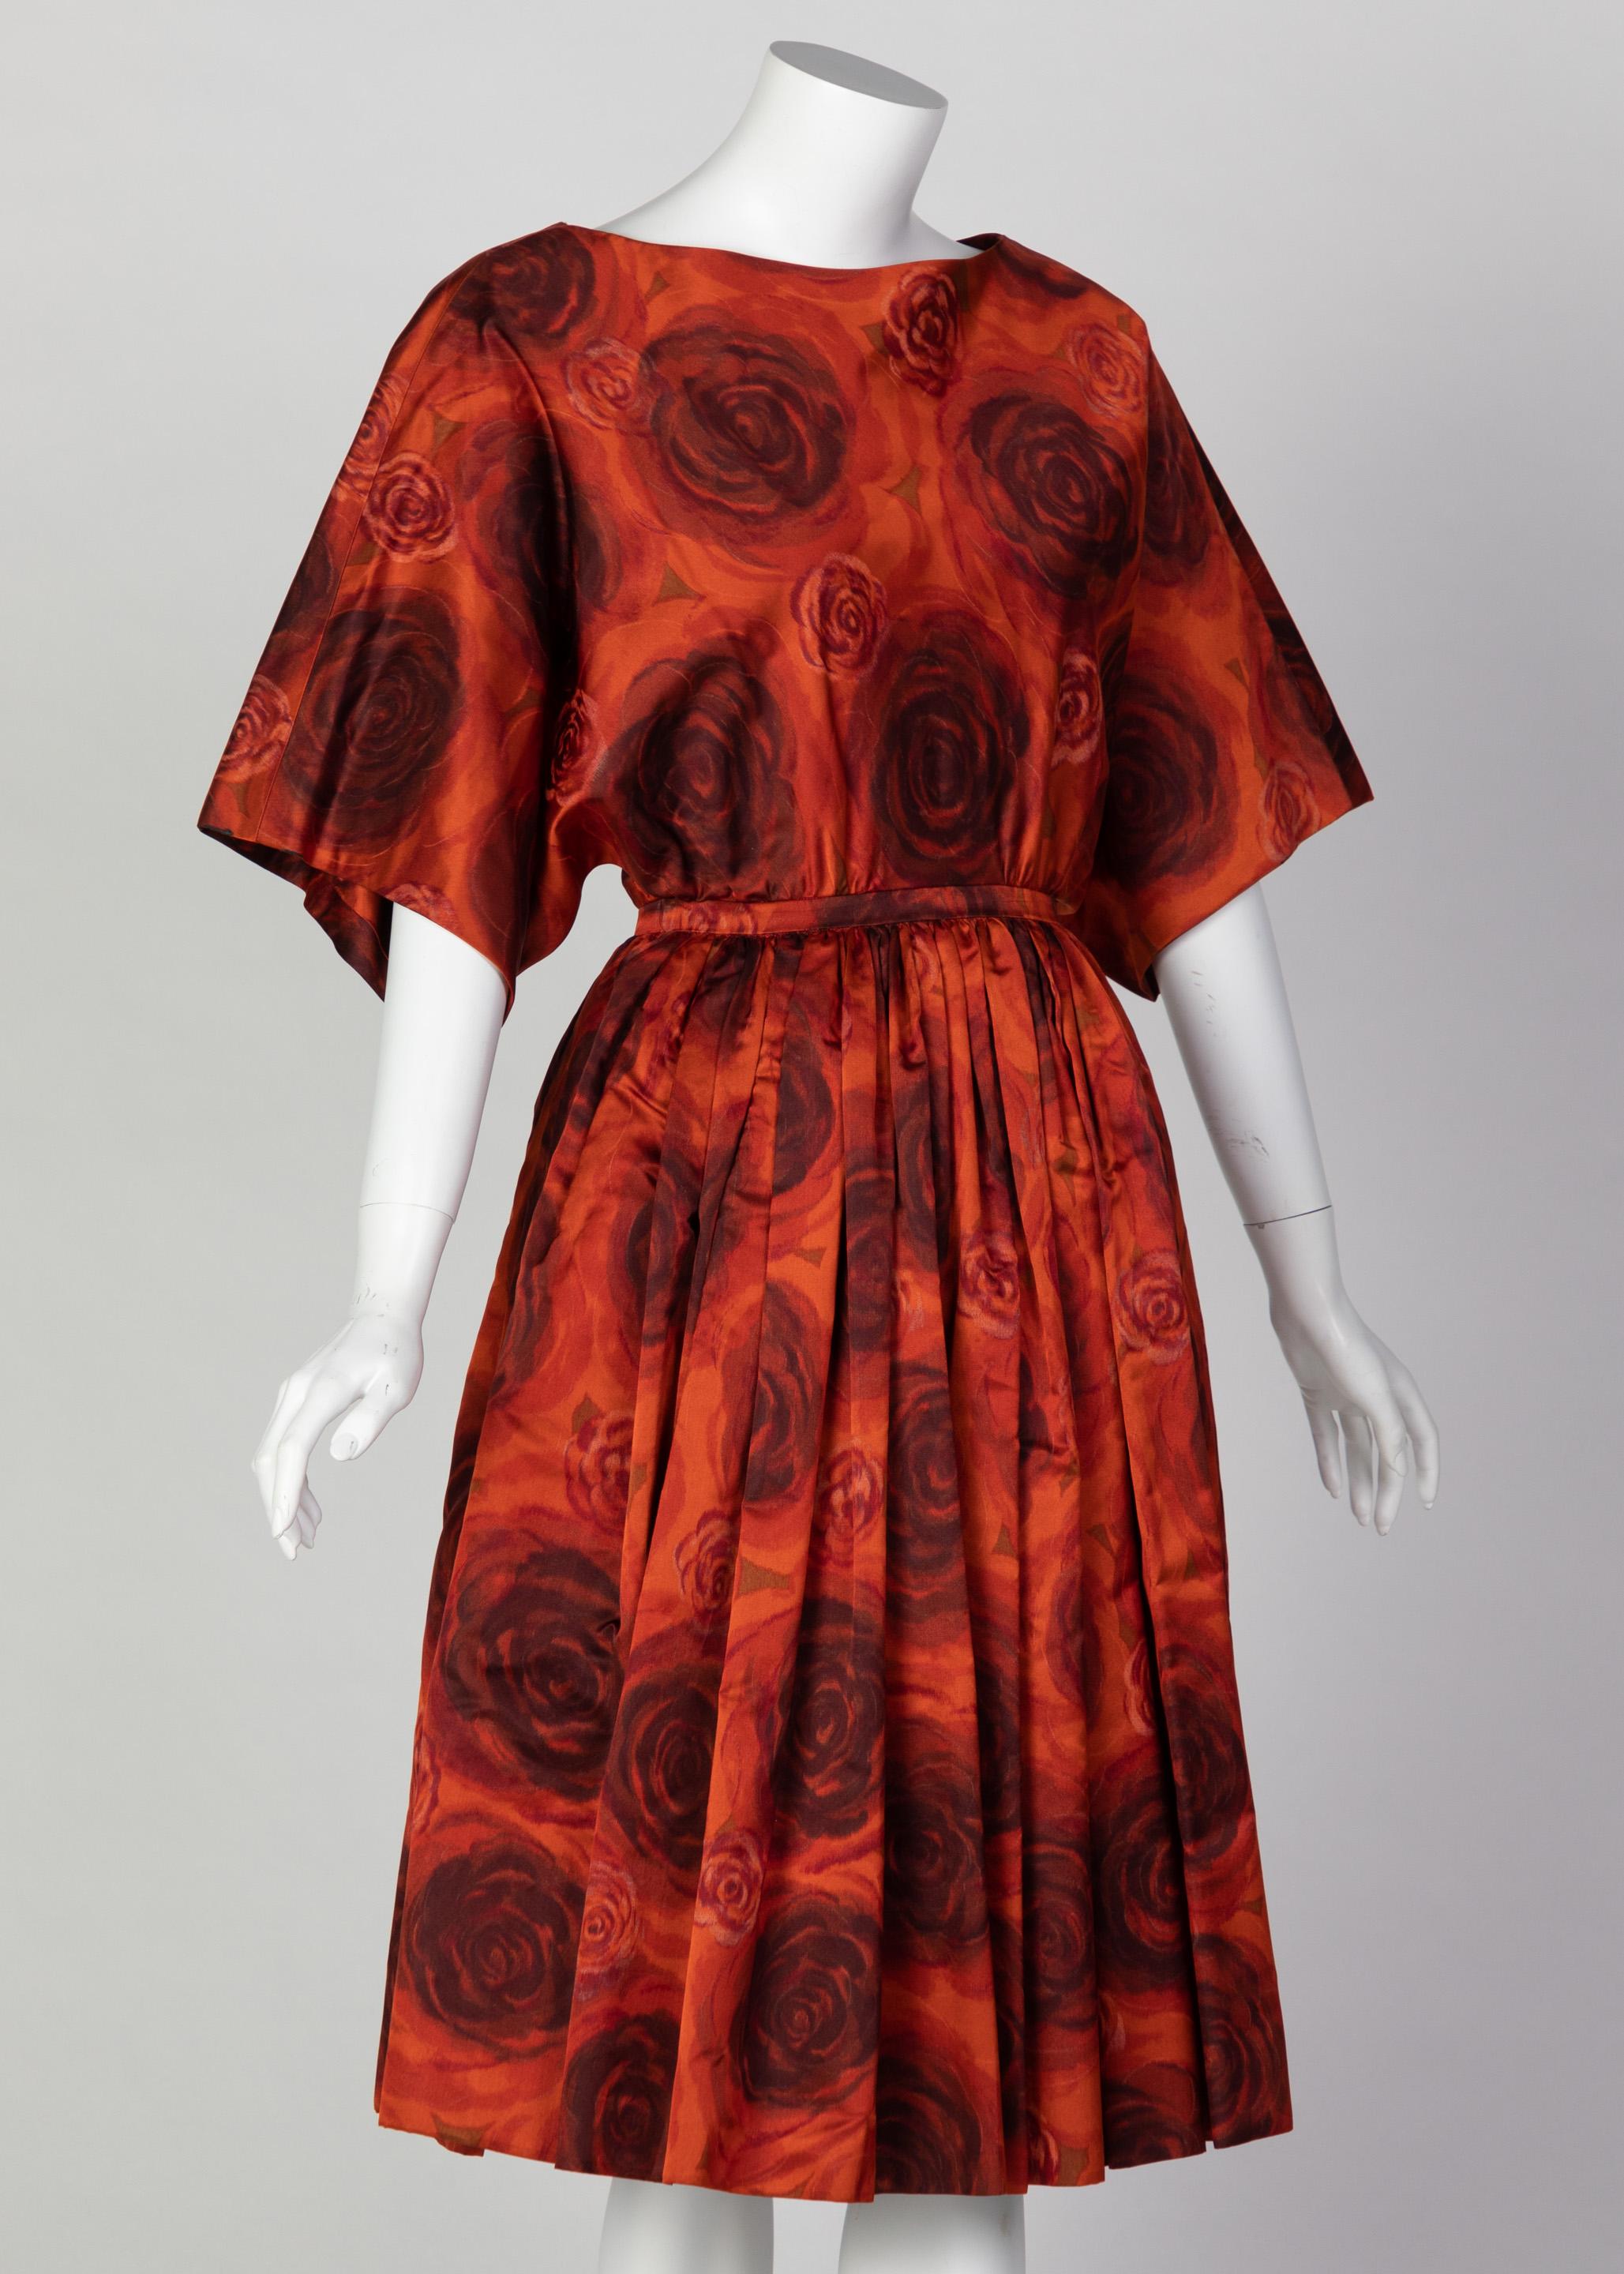 James Galanos was a design icon in the word of fashion throughout the late 20th century. His designs conveyed a sense of status, elegance, and ease. Of his exceptionally well-balanced aesthetic former first lady and dedicated Galanos client, Nancy